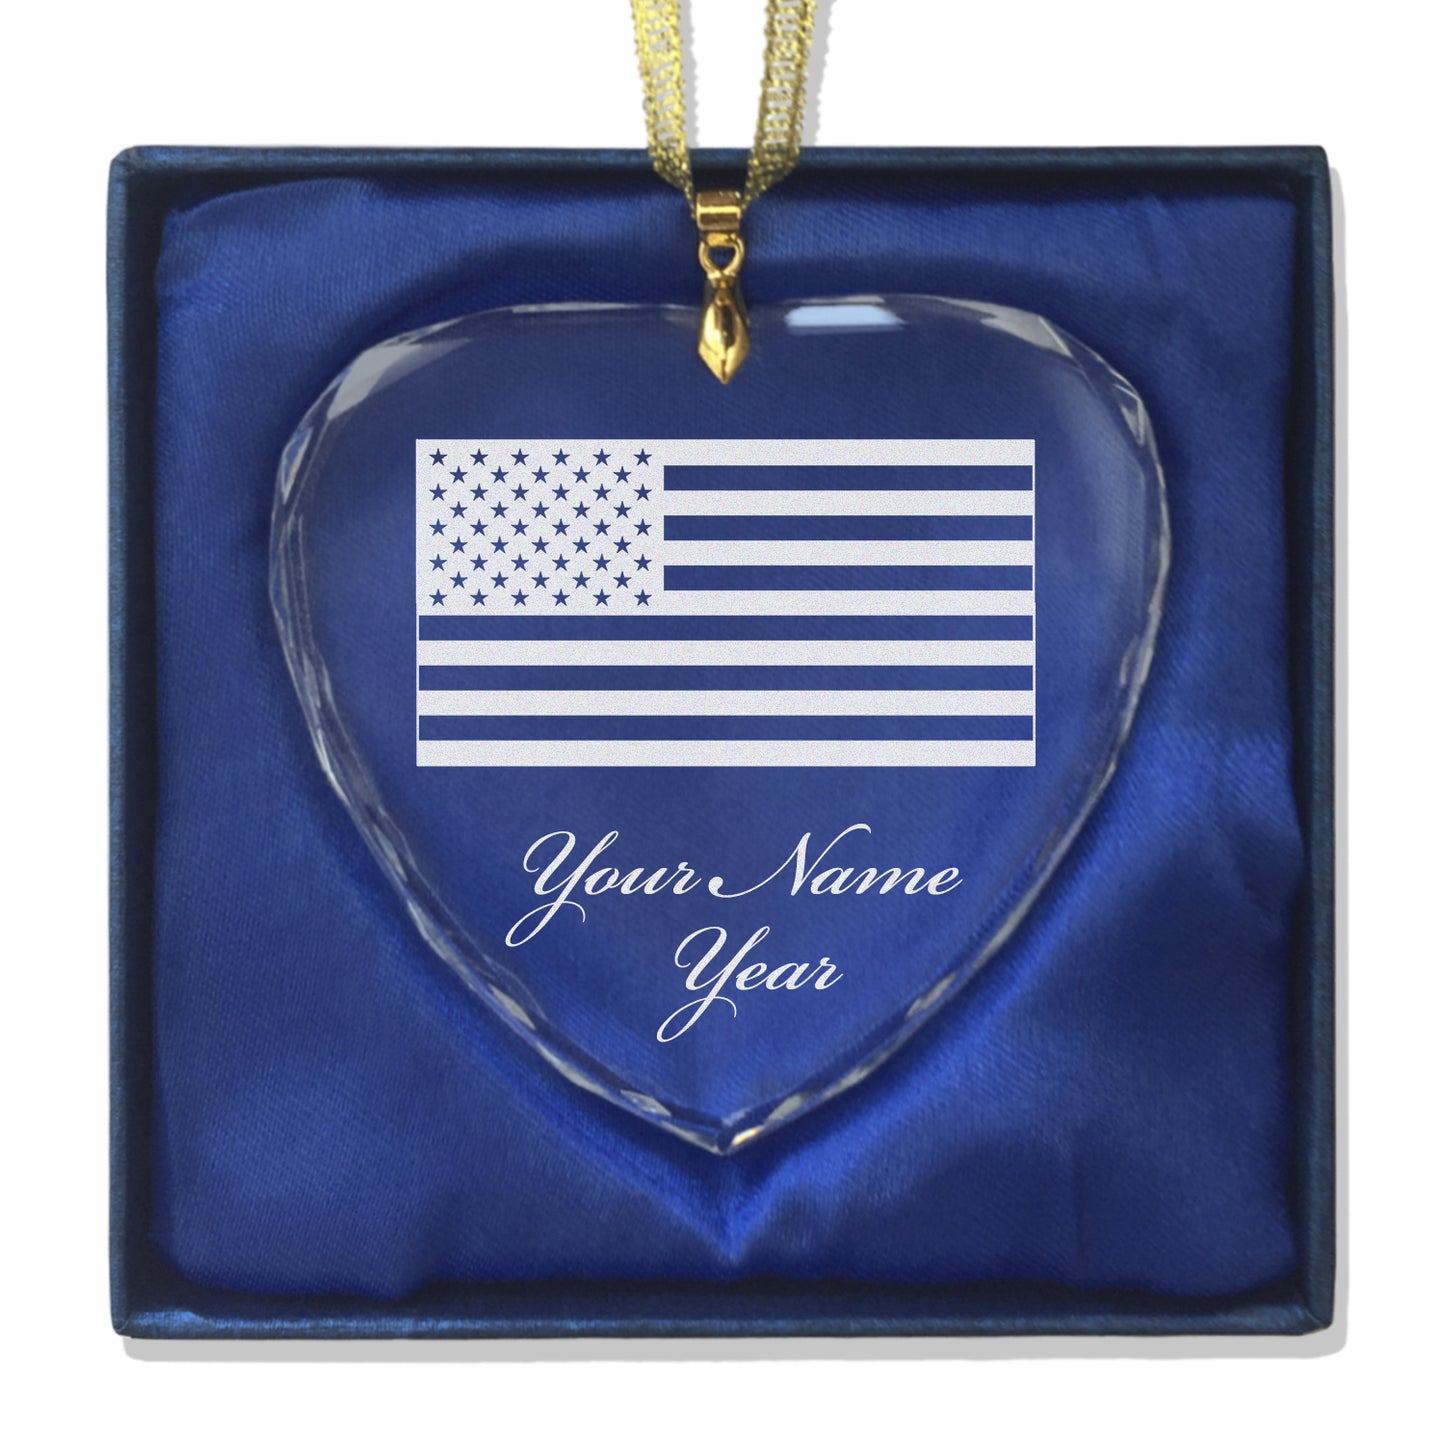 LaserGram Christmas Ornament, Flag of the United States, Personalized Engraving Included (Heart Shape)